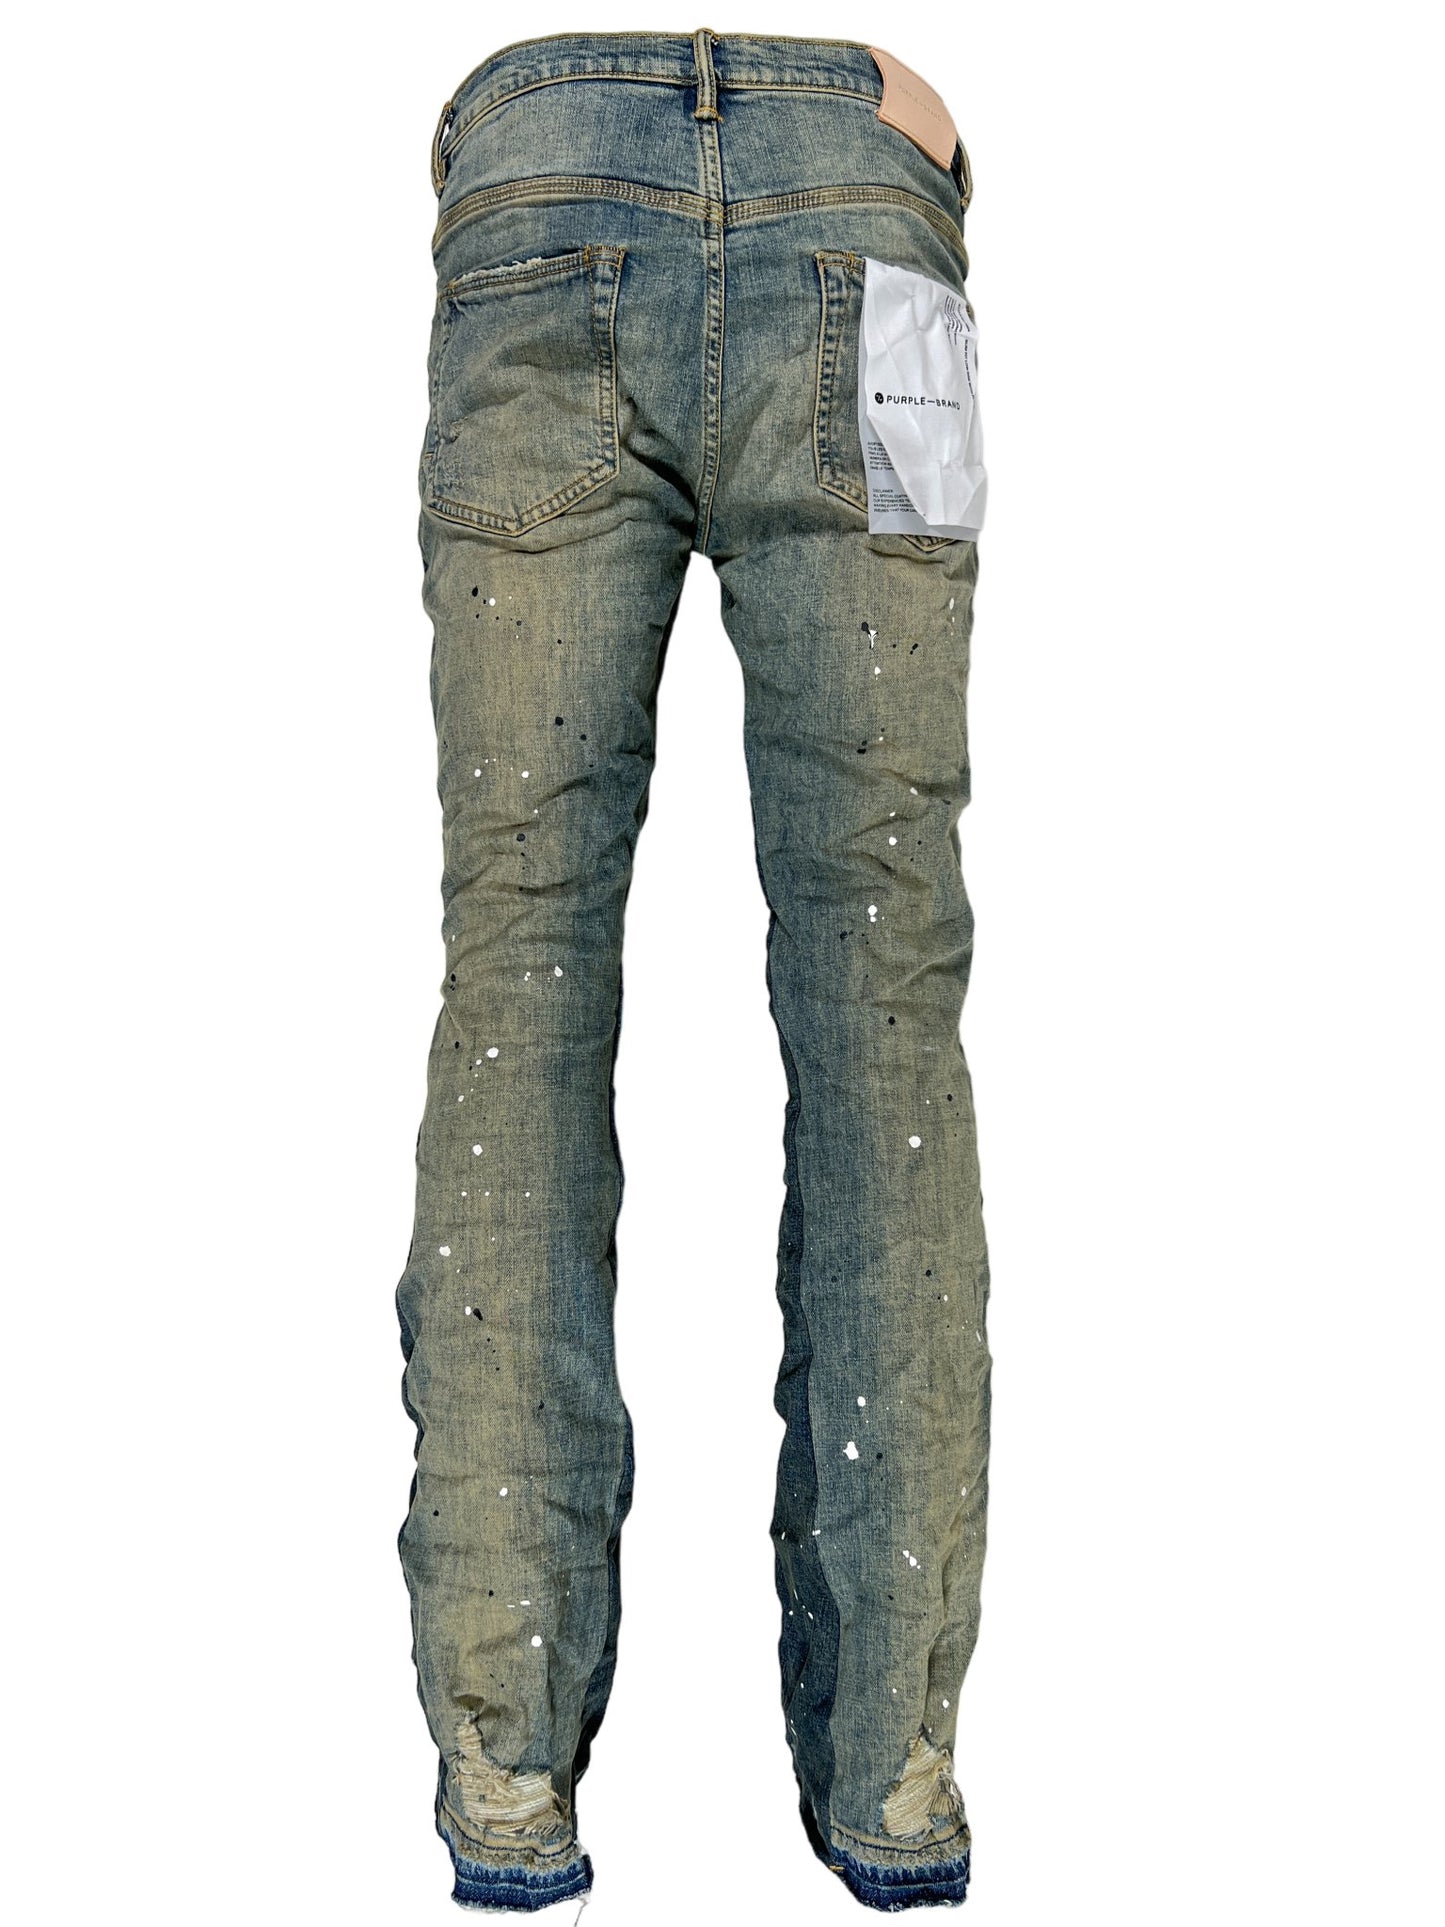 The back view of a pair of PURPLE BRAND JEANS P004-MIDD DOUBLE PANELS FLARE DESTROY INDIGO with paint splatters on them.